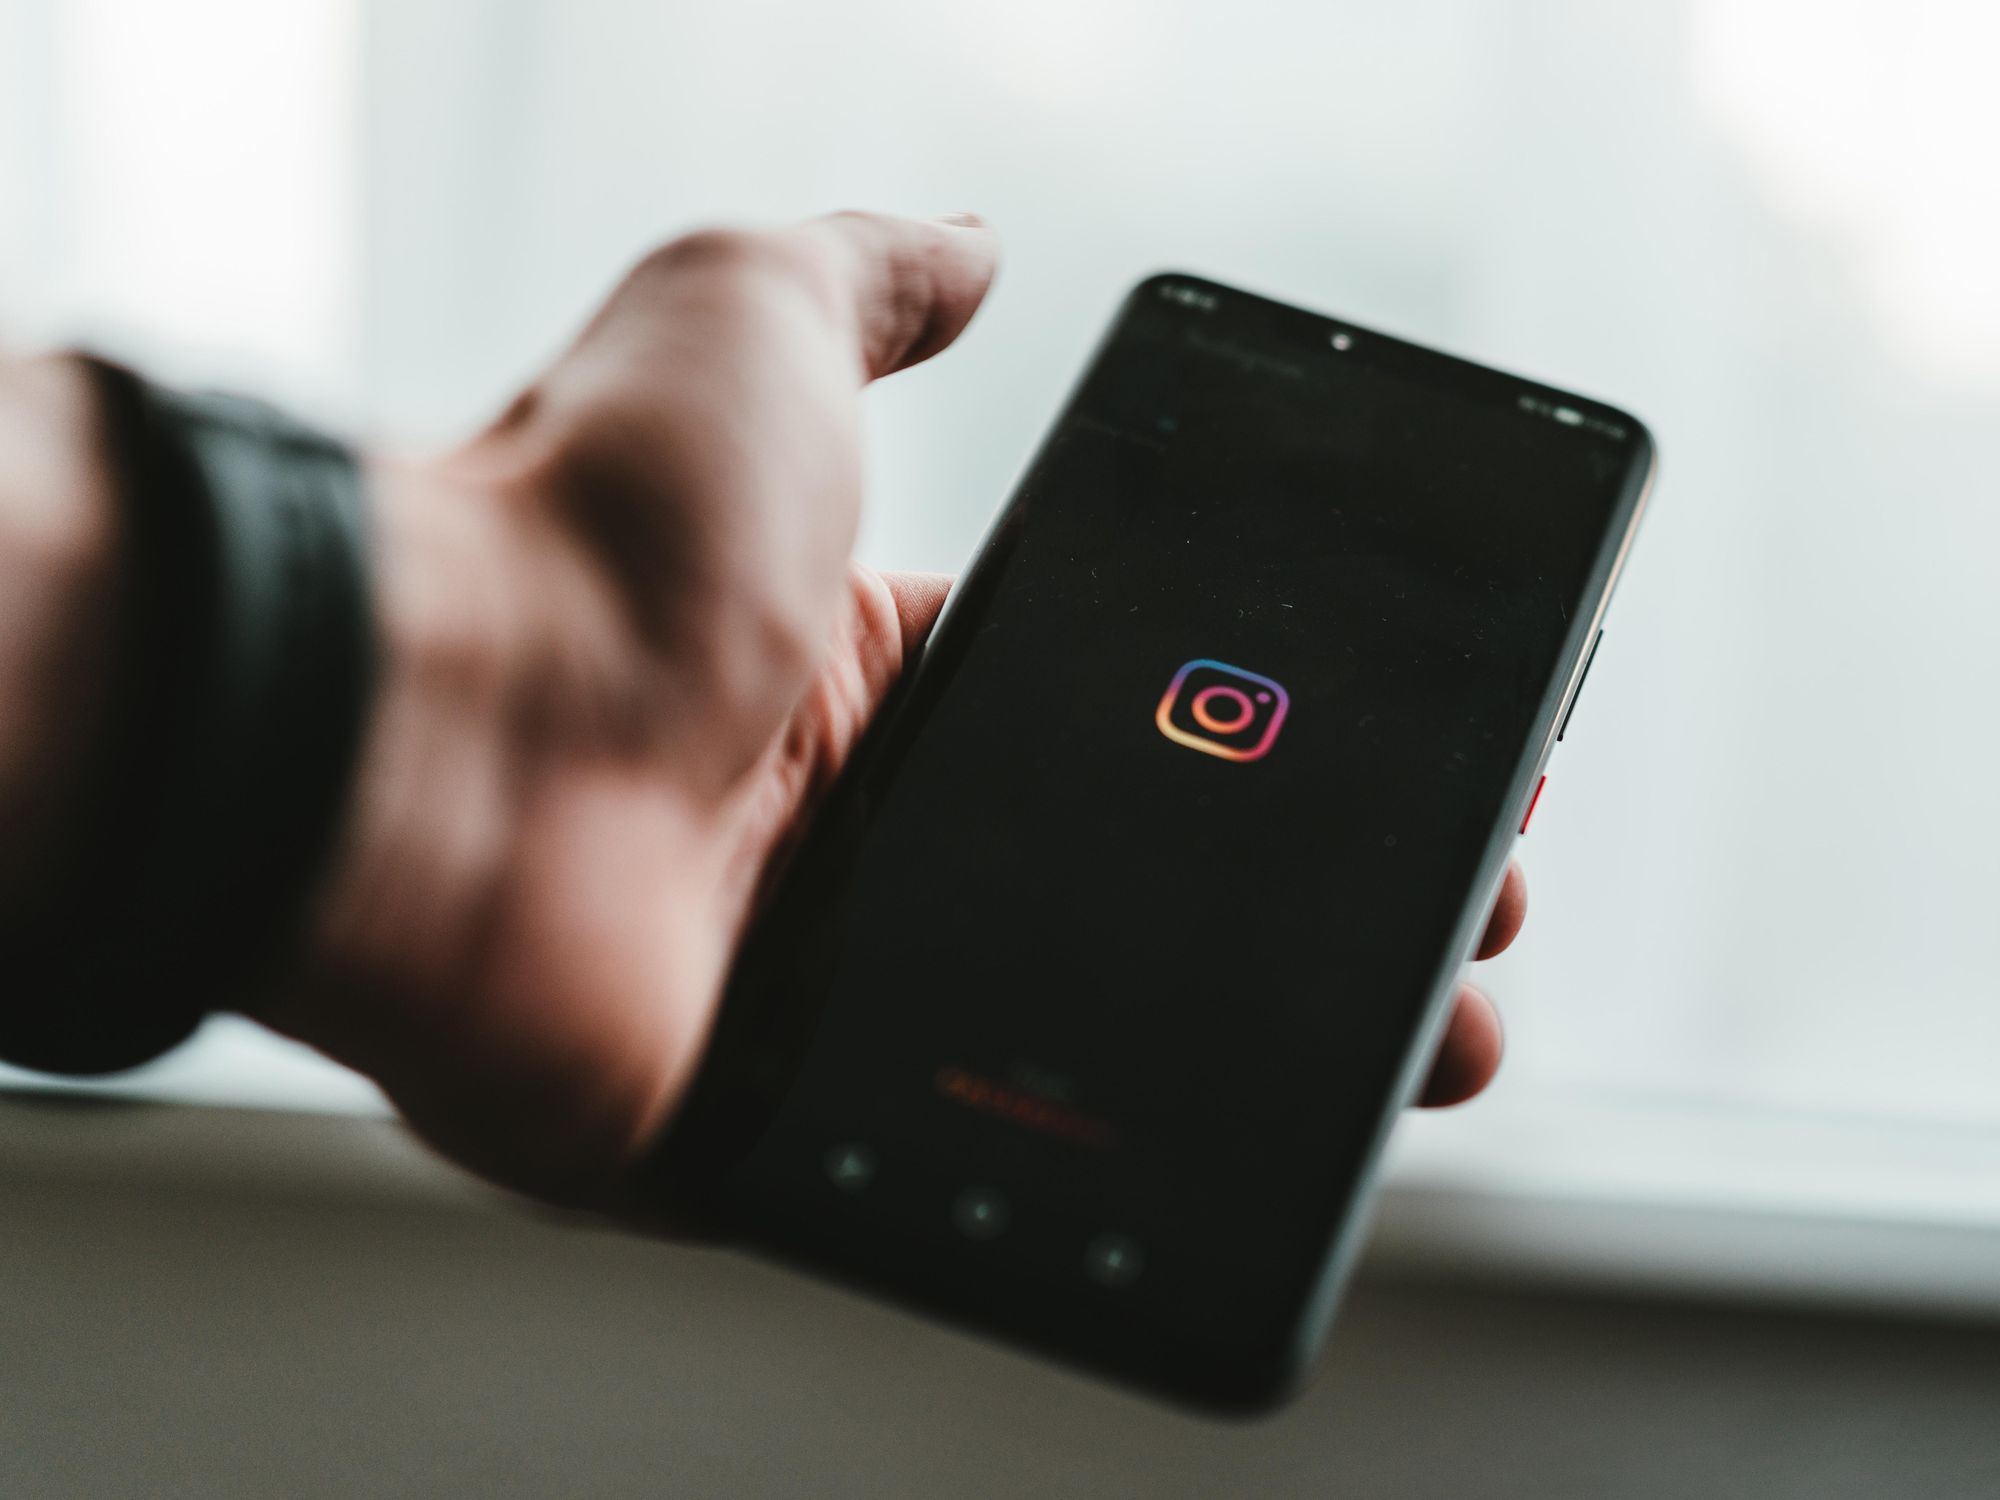 Instagram Is Combatting Reposted TikTok Videos With a New Algorithm